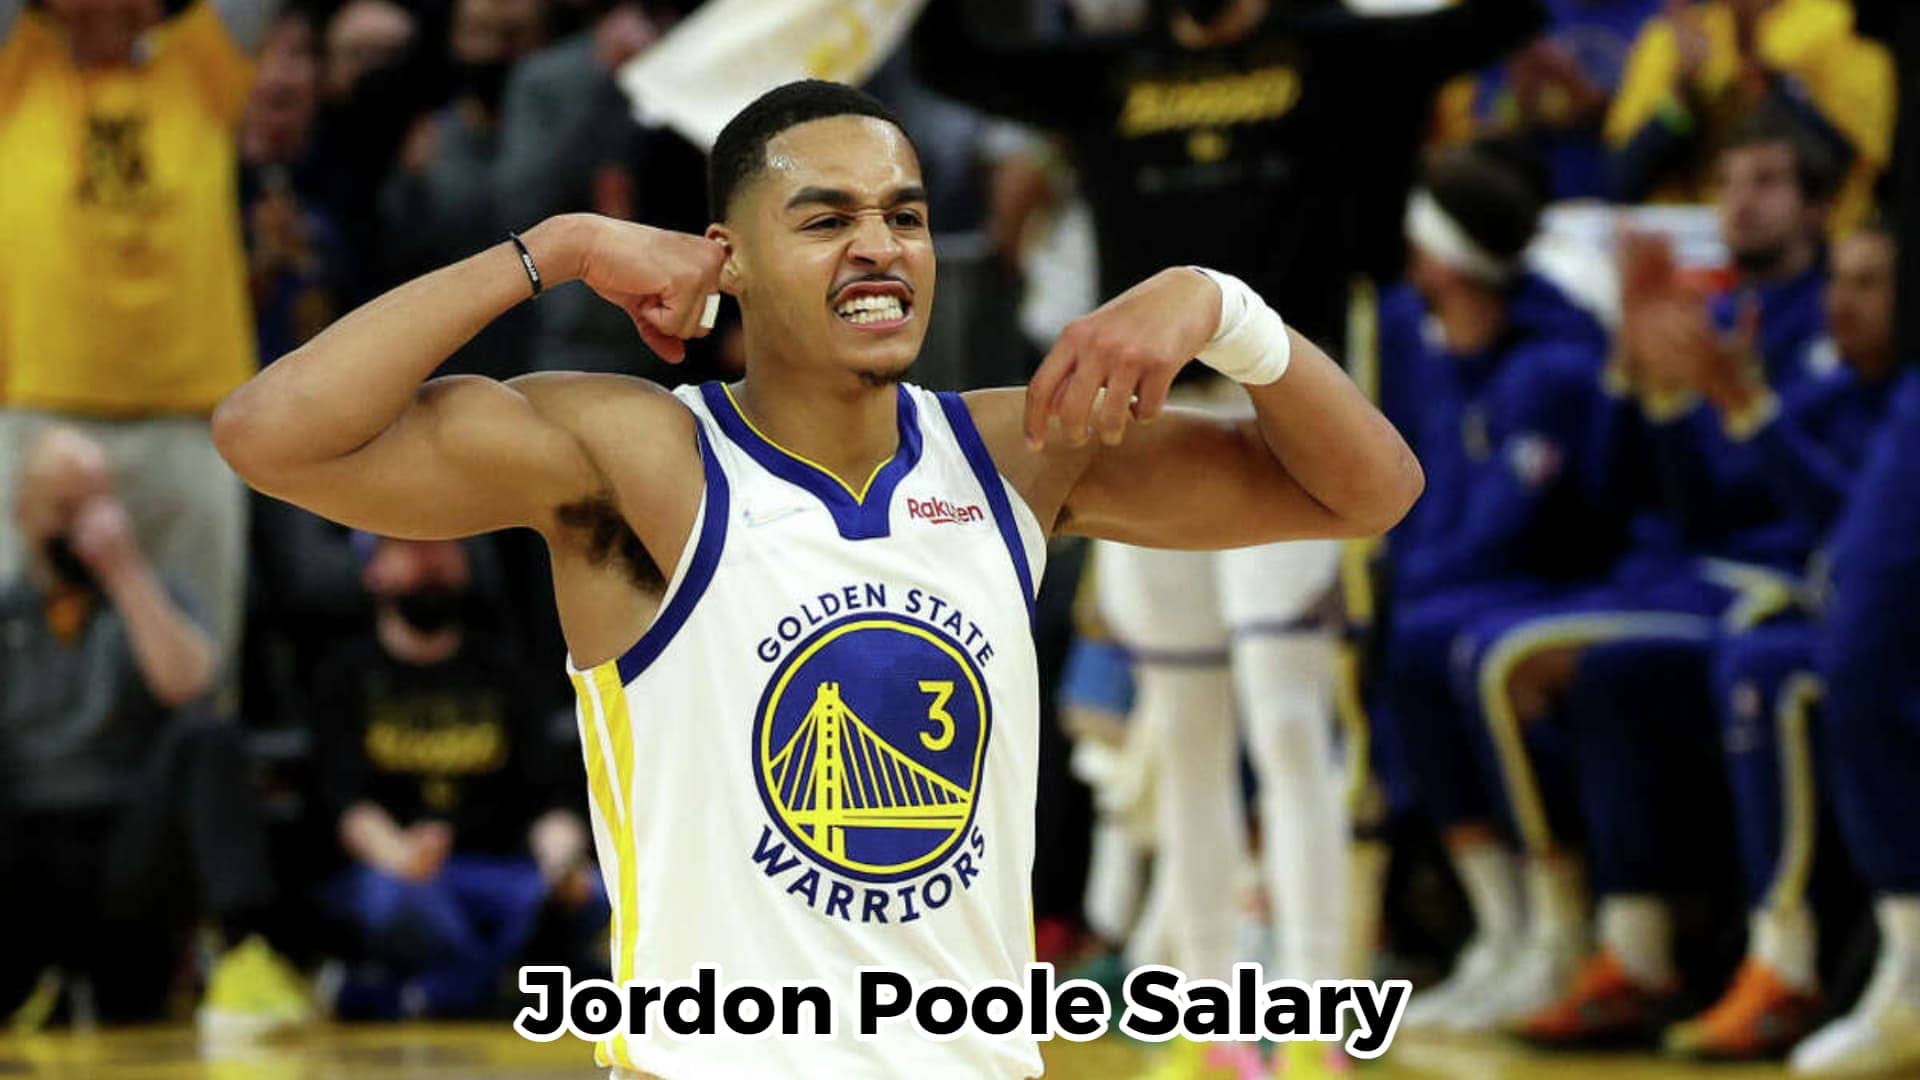 How much is Jordan Poole’s Salary?